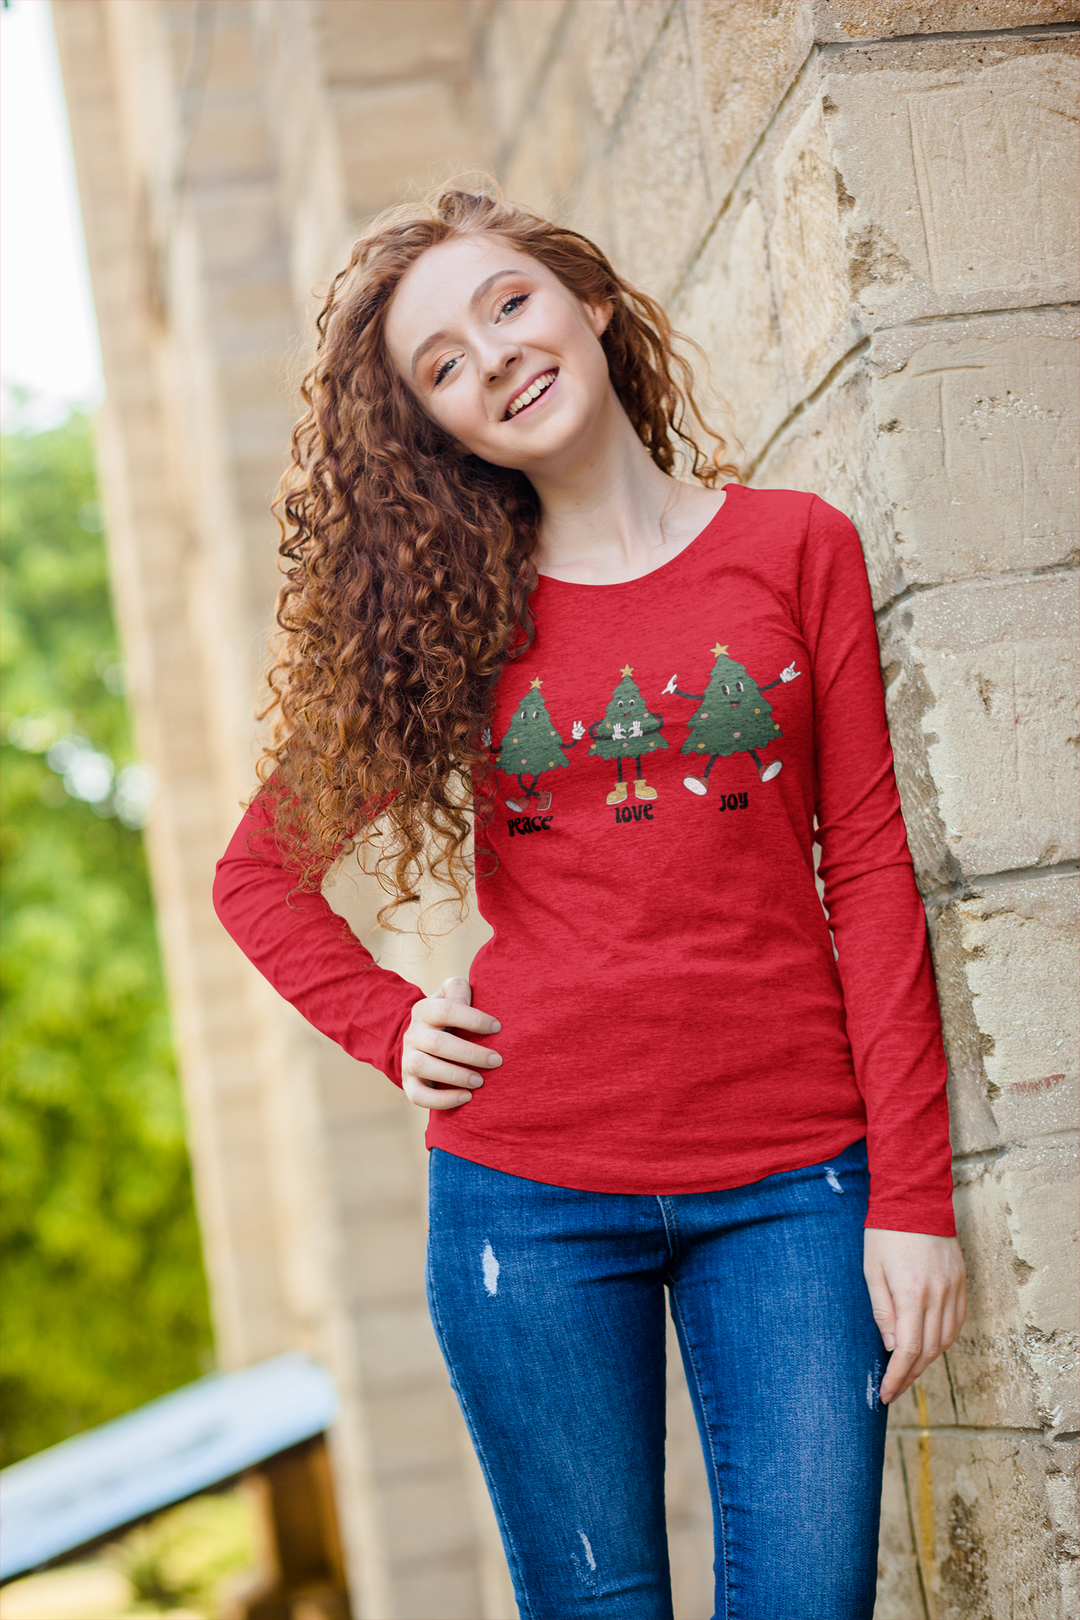 A woman in a red Peace Love Joy Long Sleeve Tee, featuring long curly hair, standing casually next to a brick wall. Classic fit, no side seams, 100% cotton for comfort. From Worlds Worst Tees.